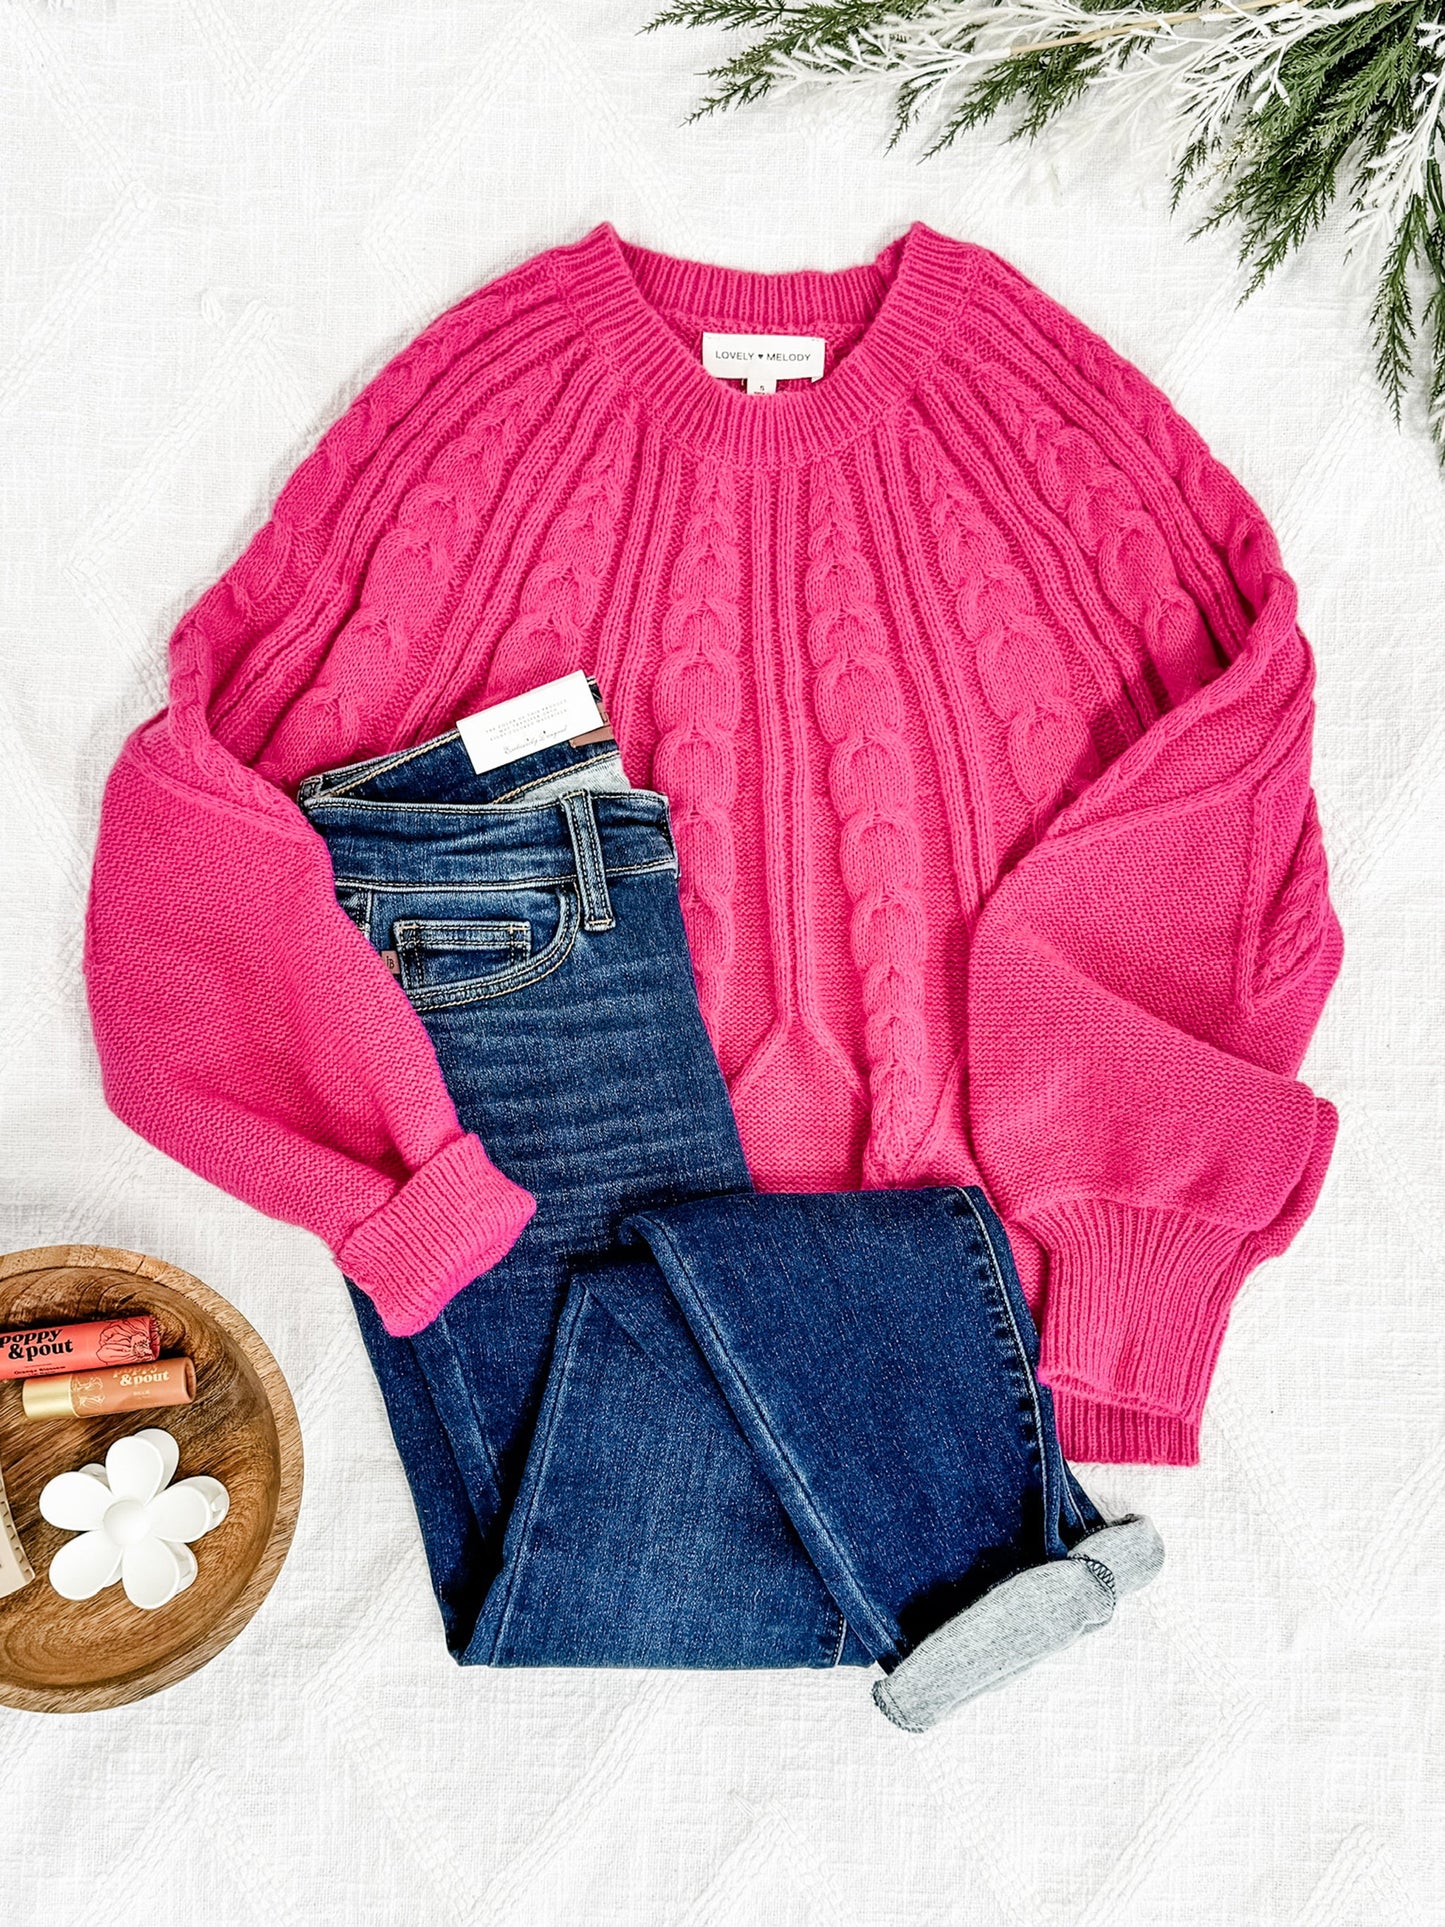 1.03 Cozy Cable Knit Sweater In Pink American Boutique Drop Ship